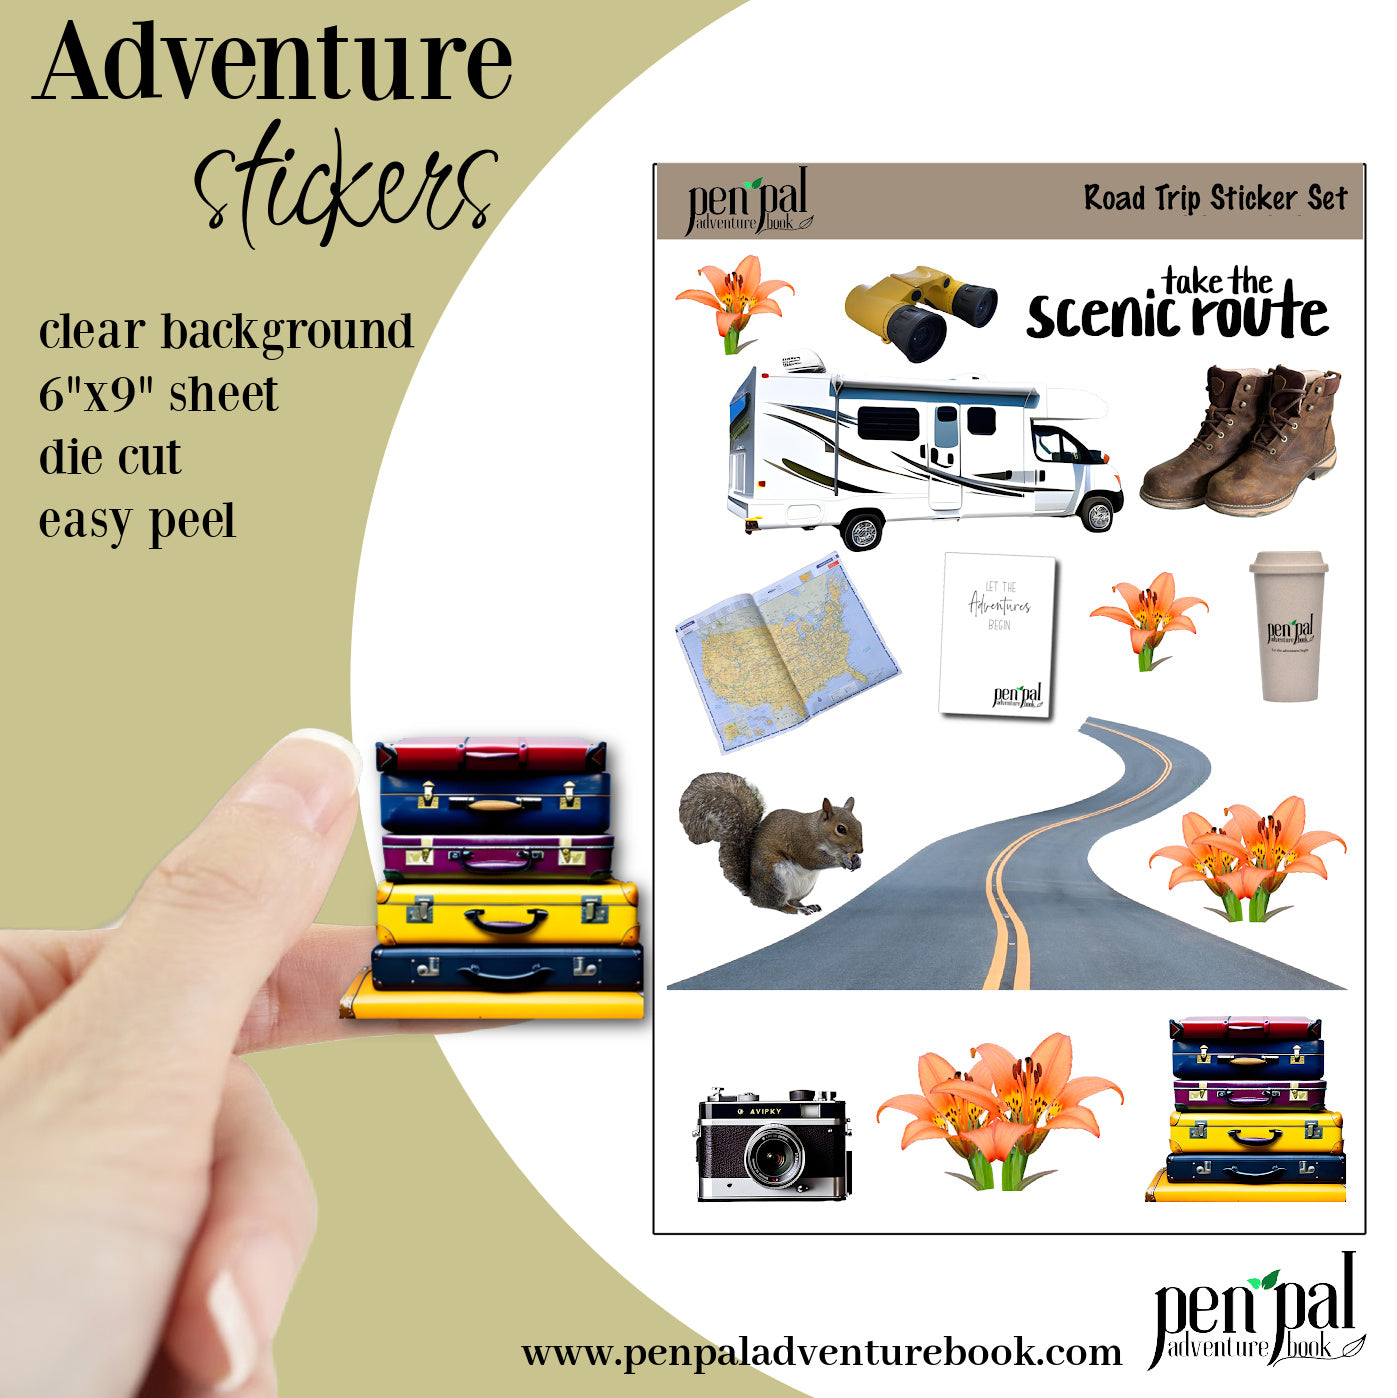 WHOLESALE-Pen Pal Adventure Book with ROAD TRIP Stickers - Set of 5 Kits